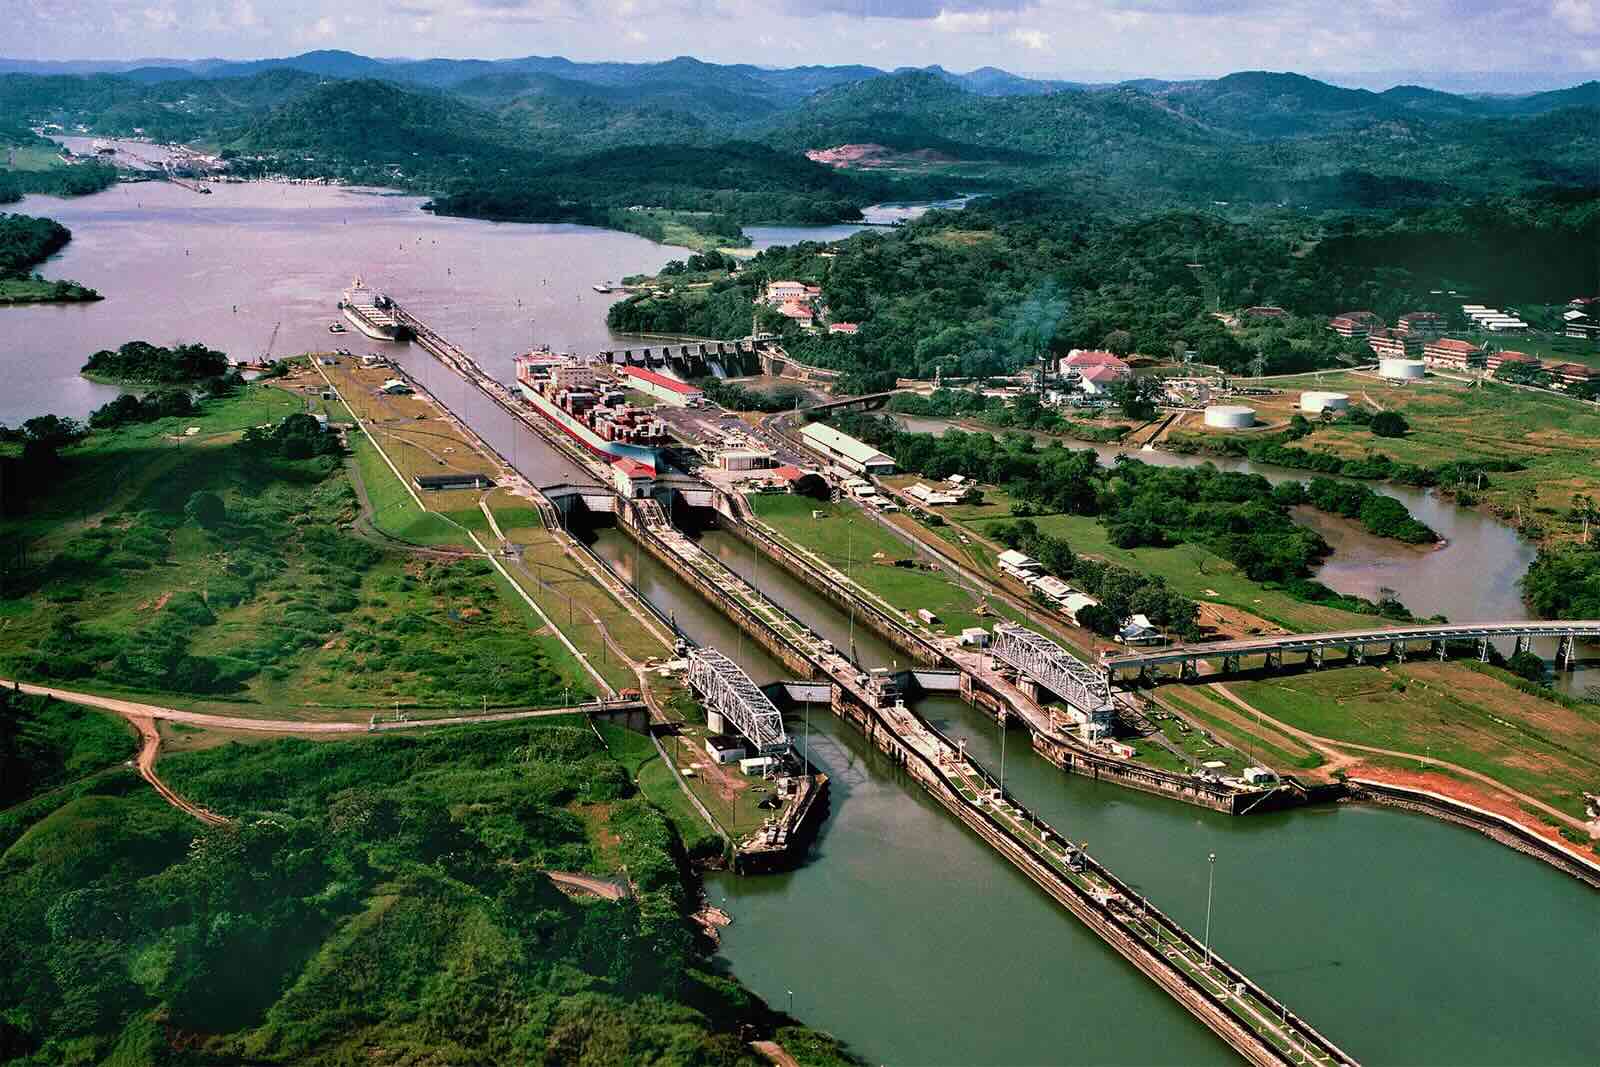 Why Was The Construction Of The Panama Canal So Important?